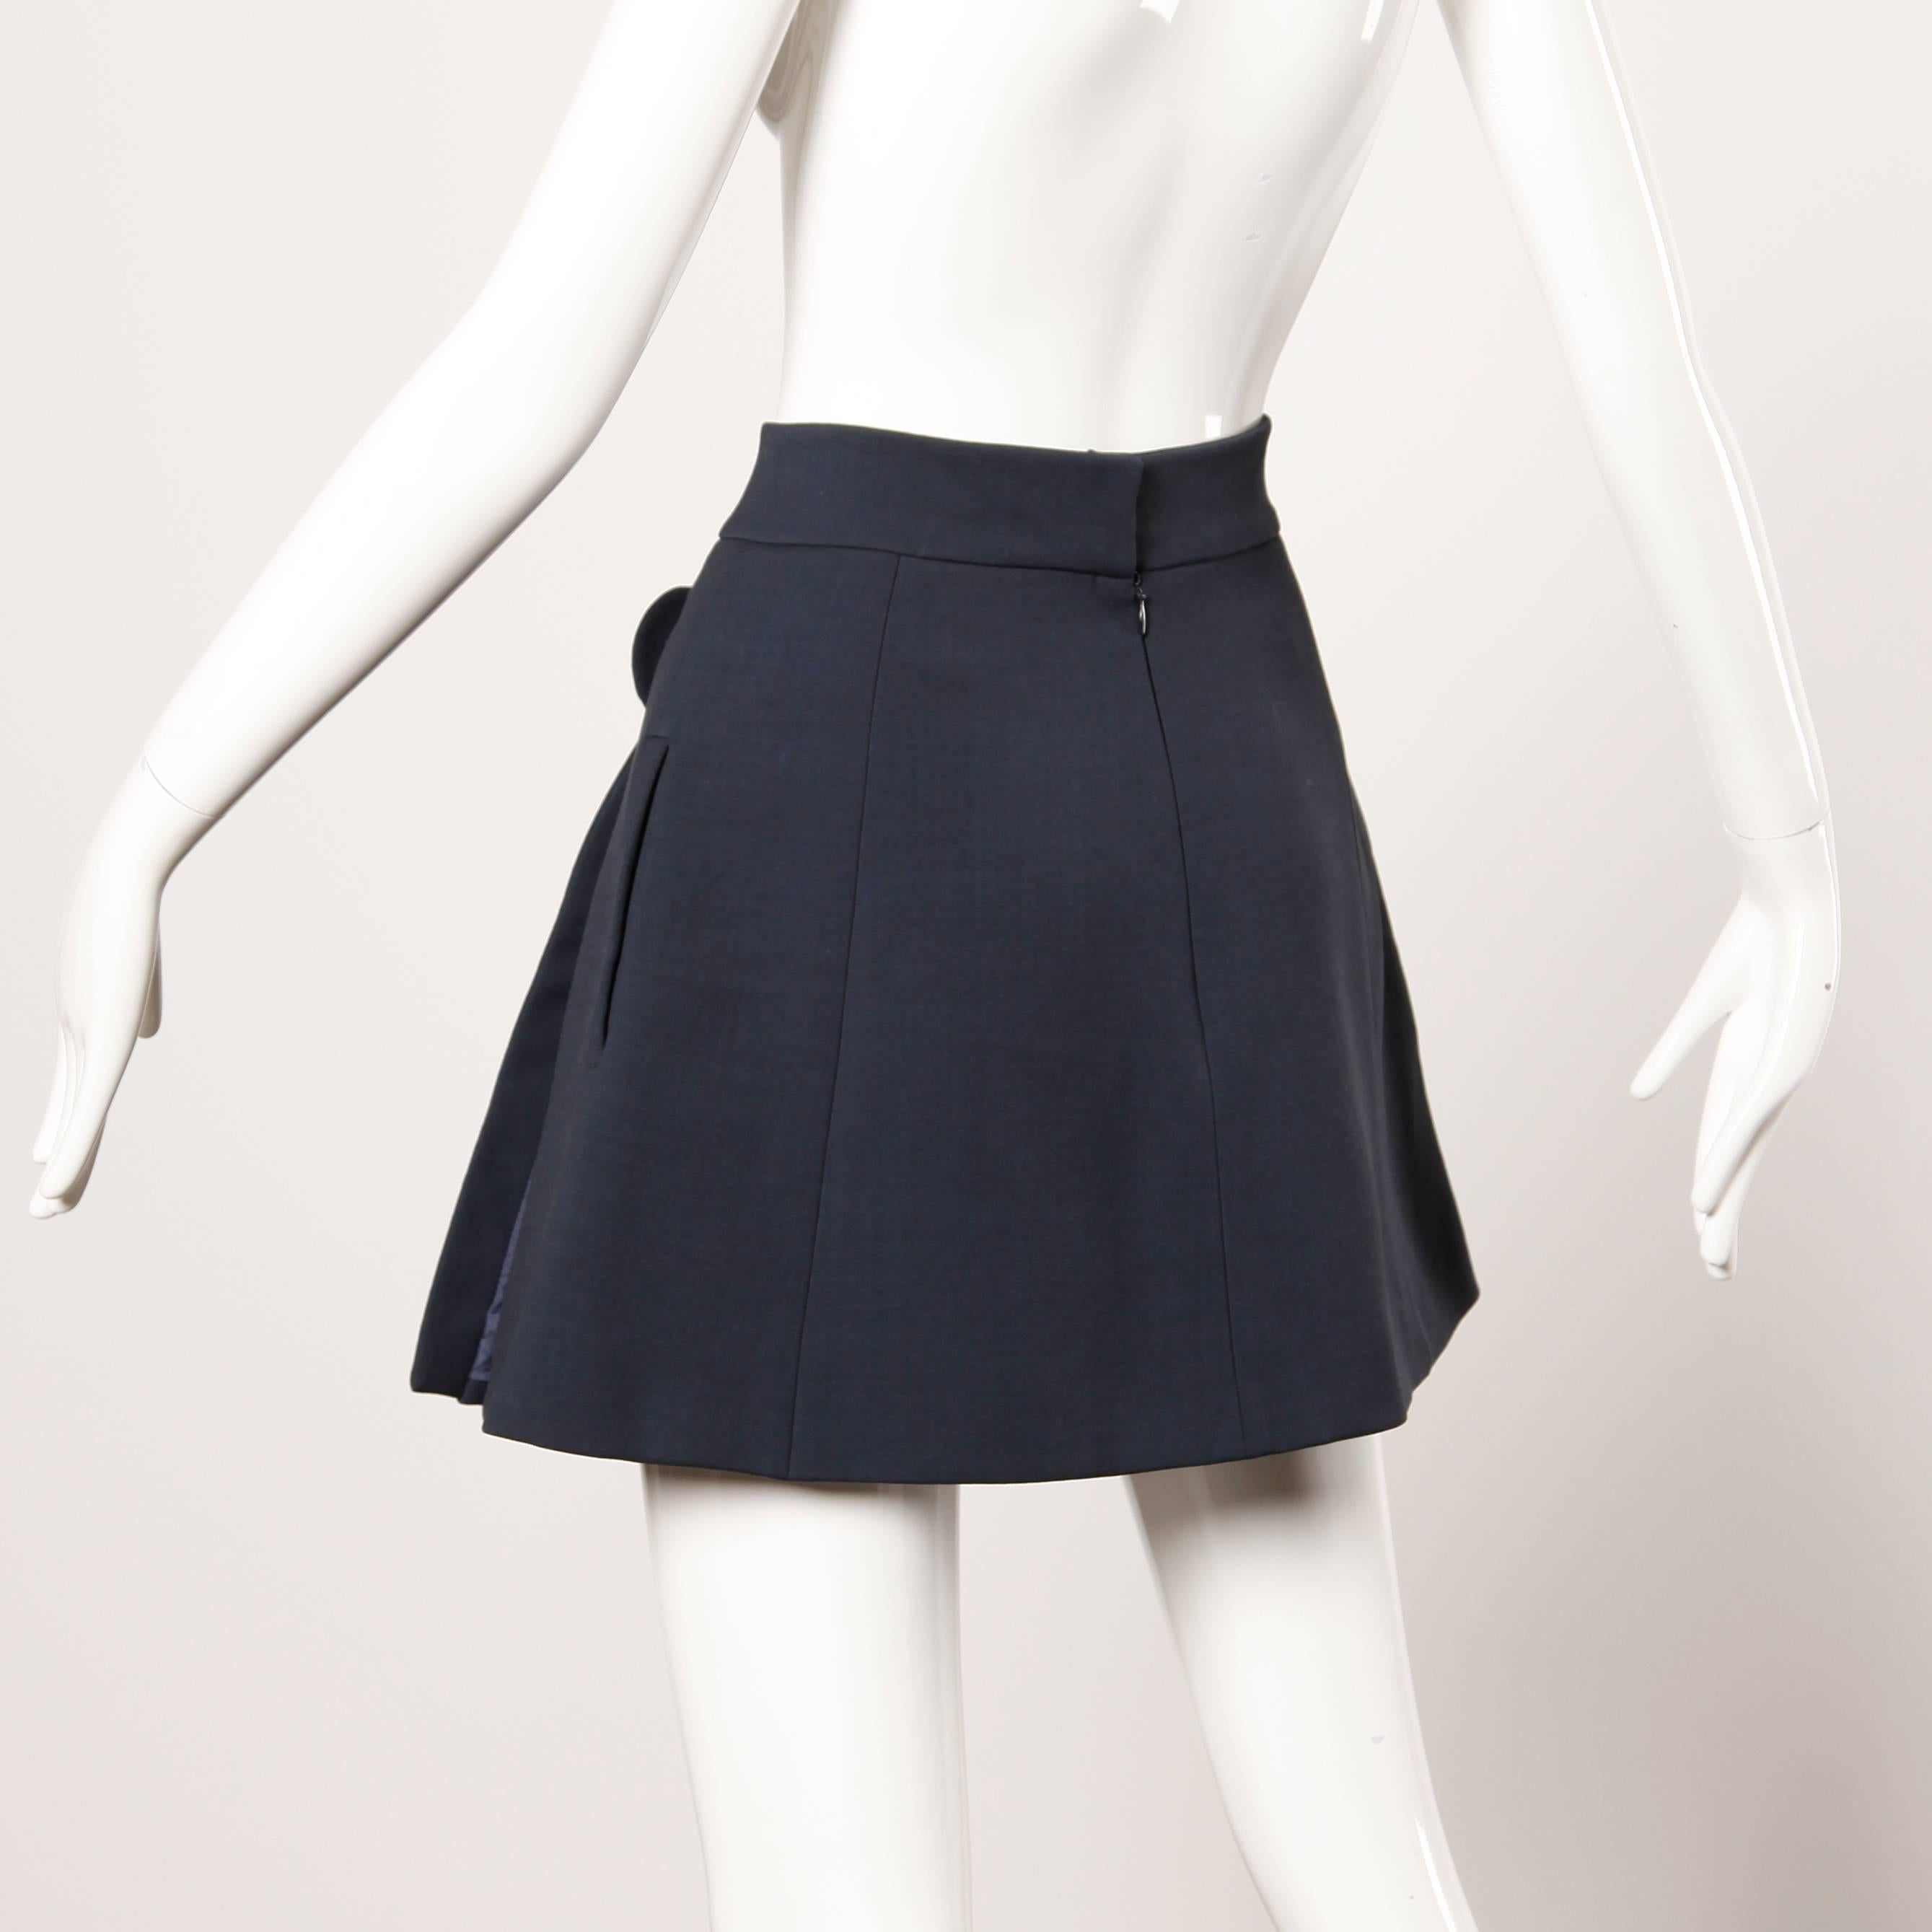 Black Incredible Delpozo Slate Blue Mini Skirt with Architectural Cut Out Detail